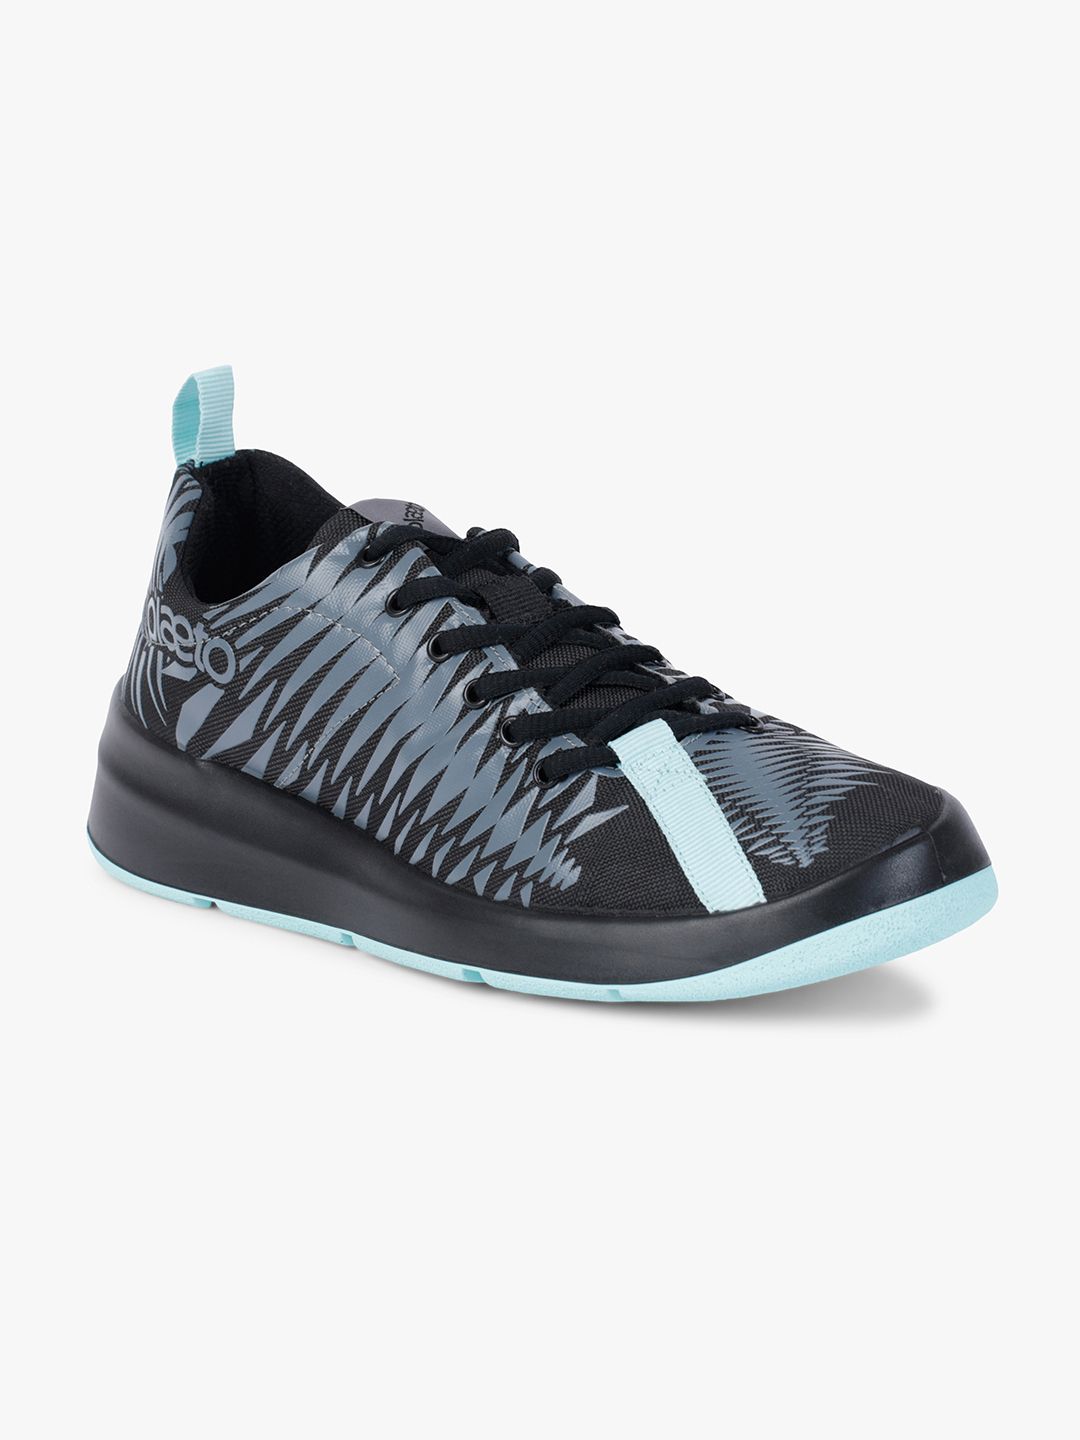 plaeto Women Black Ivy Printed Running Sports Shoes Price in India